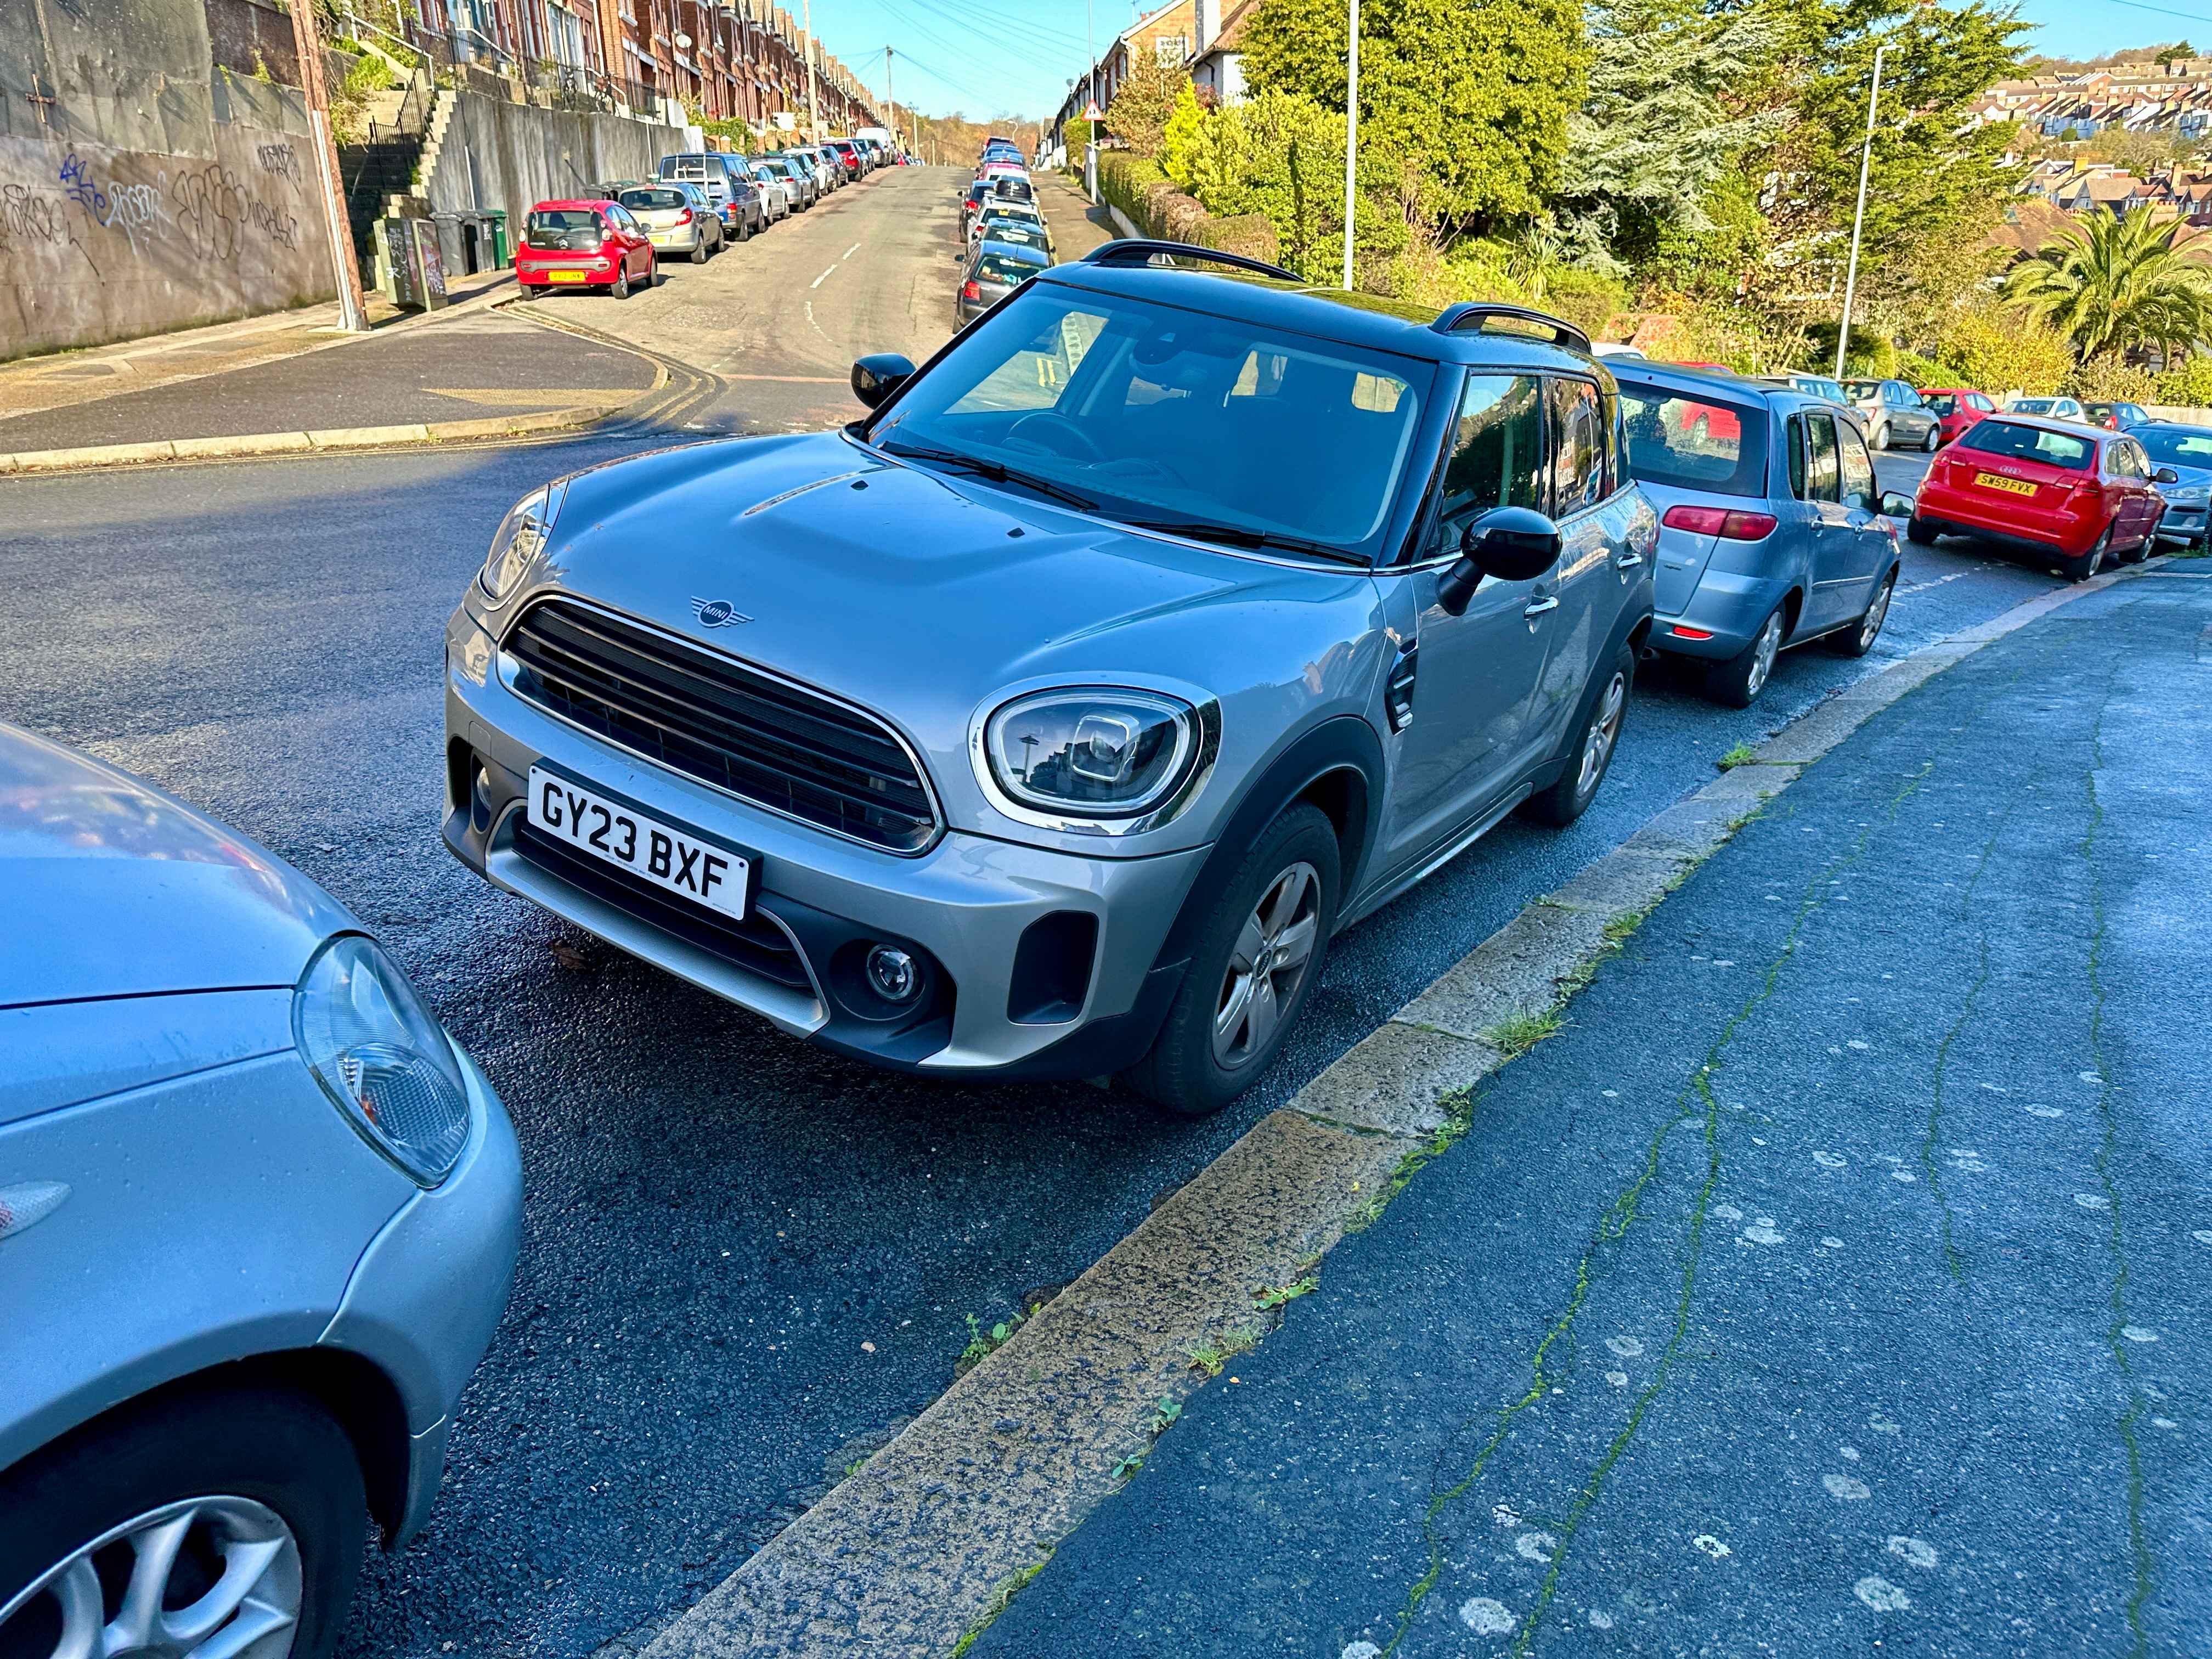 Photograph of GY23 BXF - a Grey Mini Countryman parked in Hollingdean by a non-resident who uses the local area as part of their Brighton commute. The seventh of eight photographs supplied by the residents of Hollingdean.